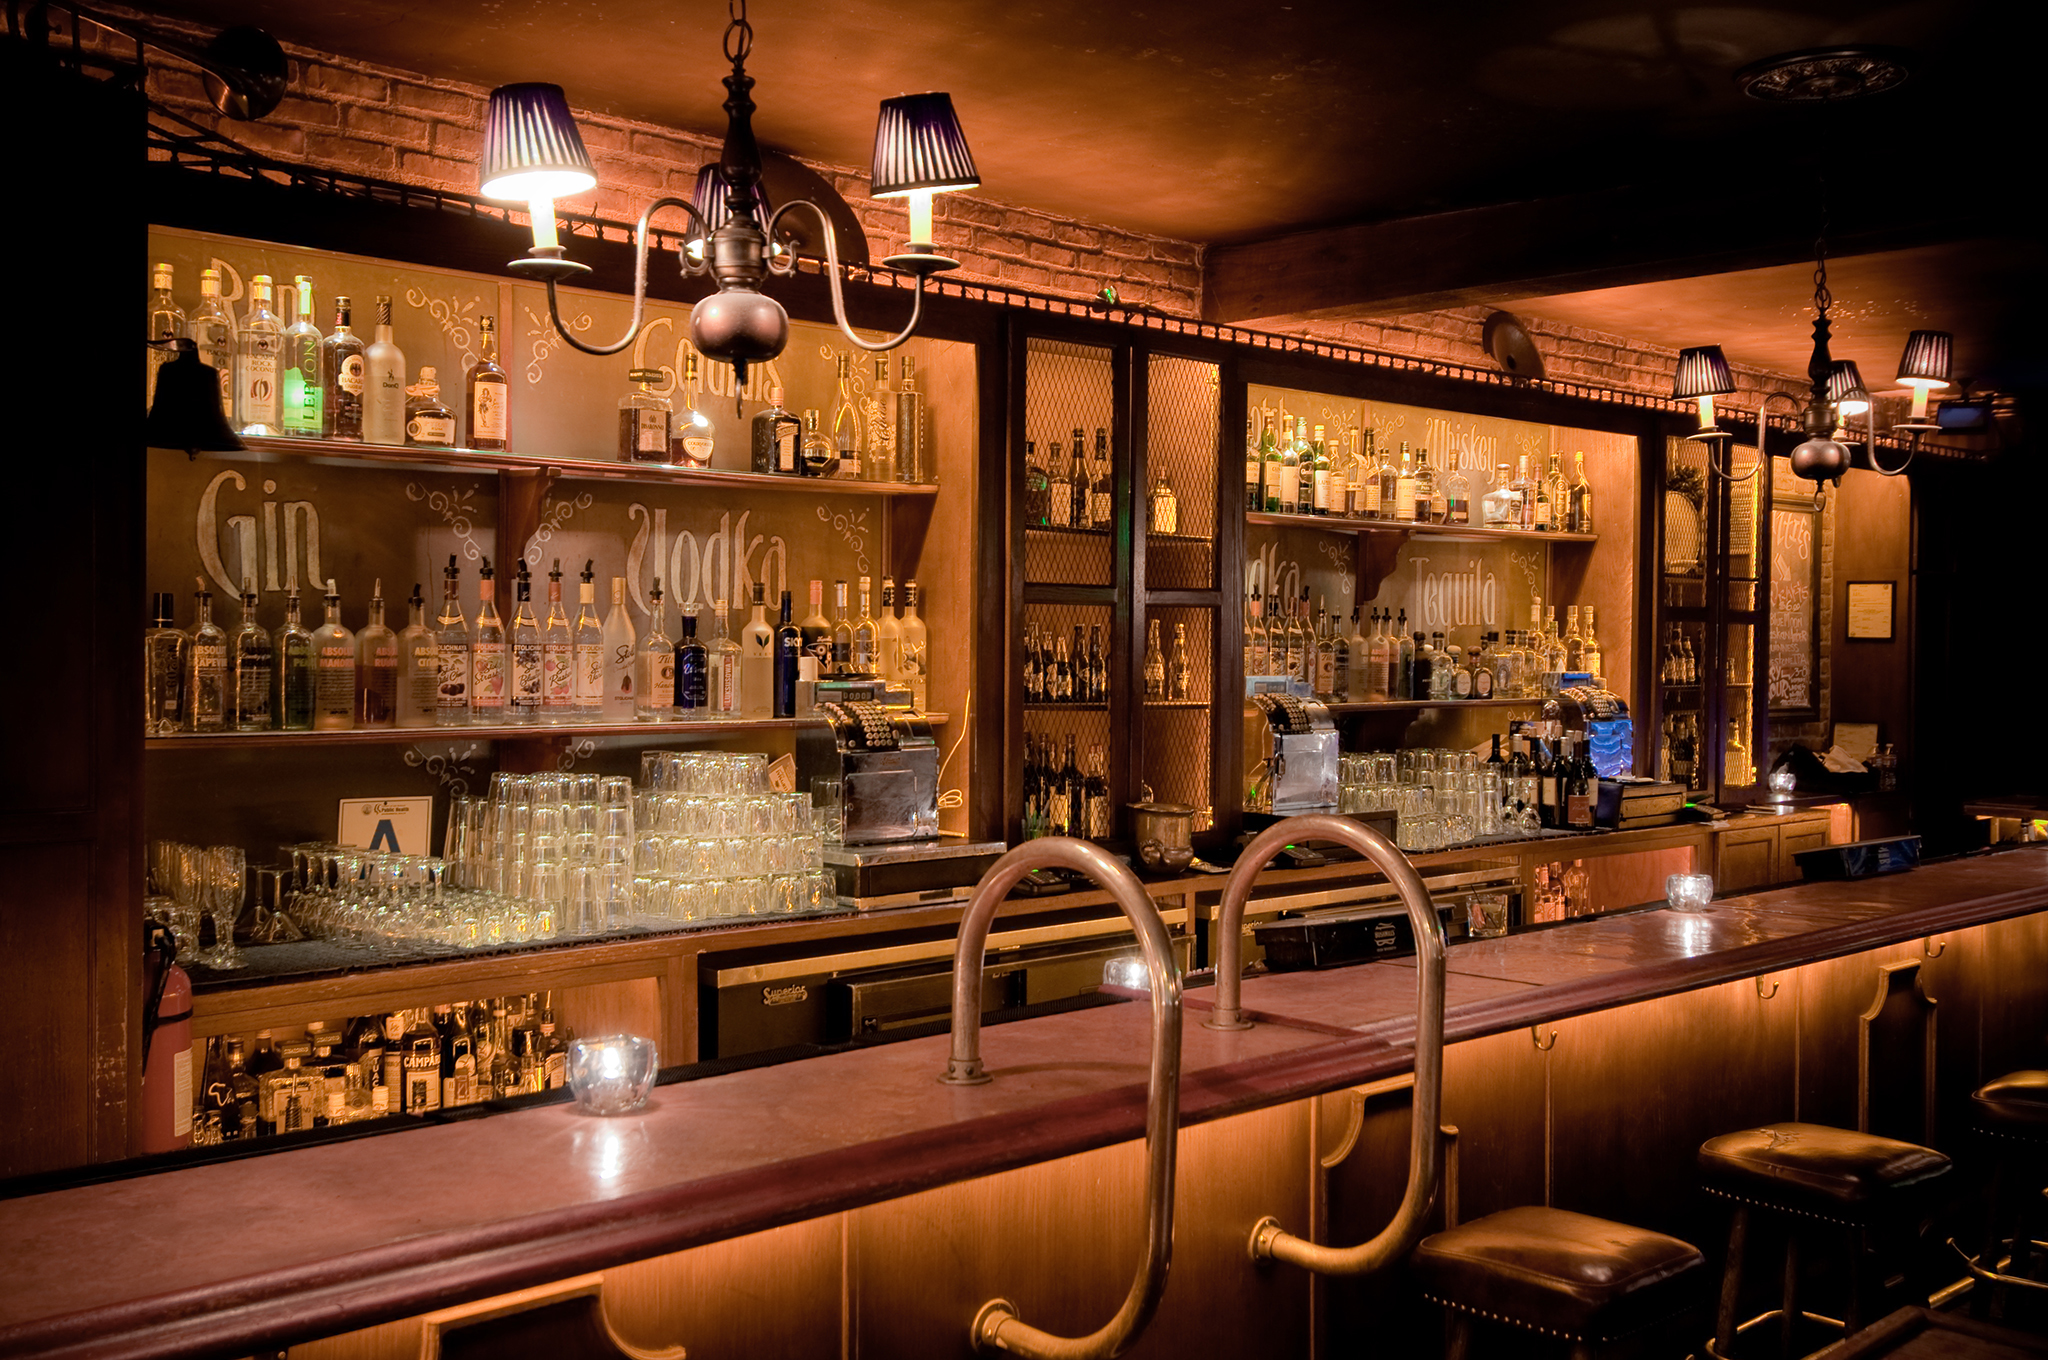 Piano Bar, Los Angeles - A slice of authenticity in amongst Hollywood's plastic bar scene